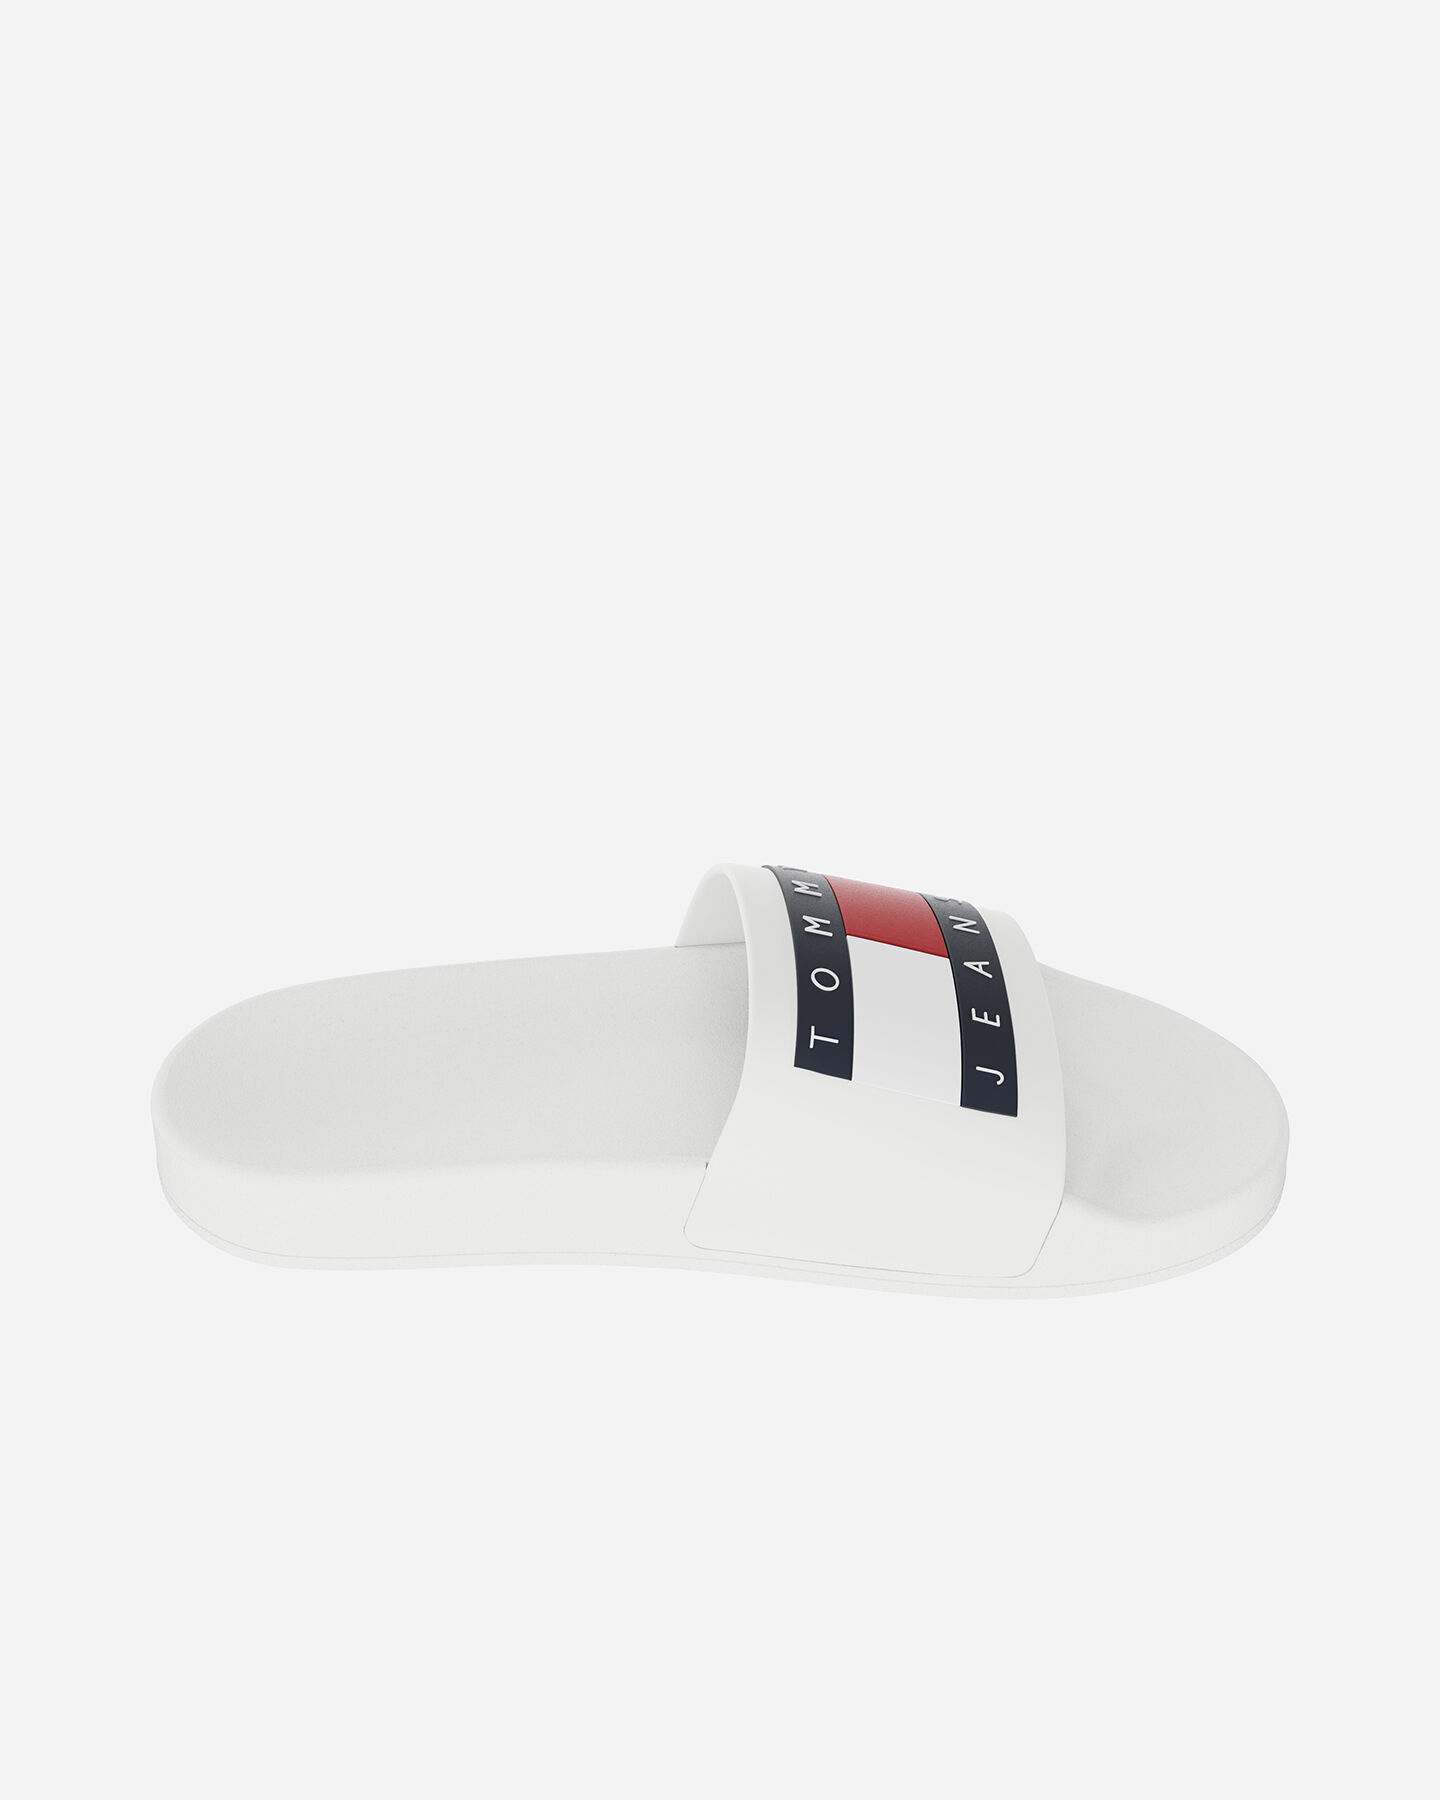  Ciabatte TOMMY HILFIGER CIABATTE POOL SLIDE M S4121260|TCR|40 scatto 3